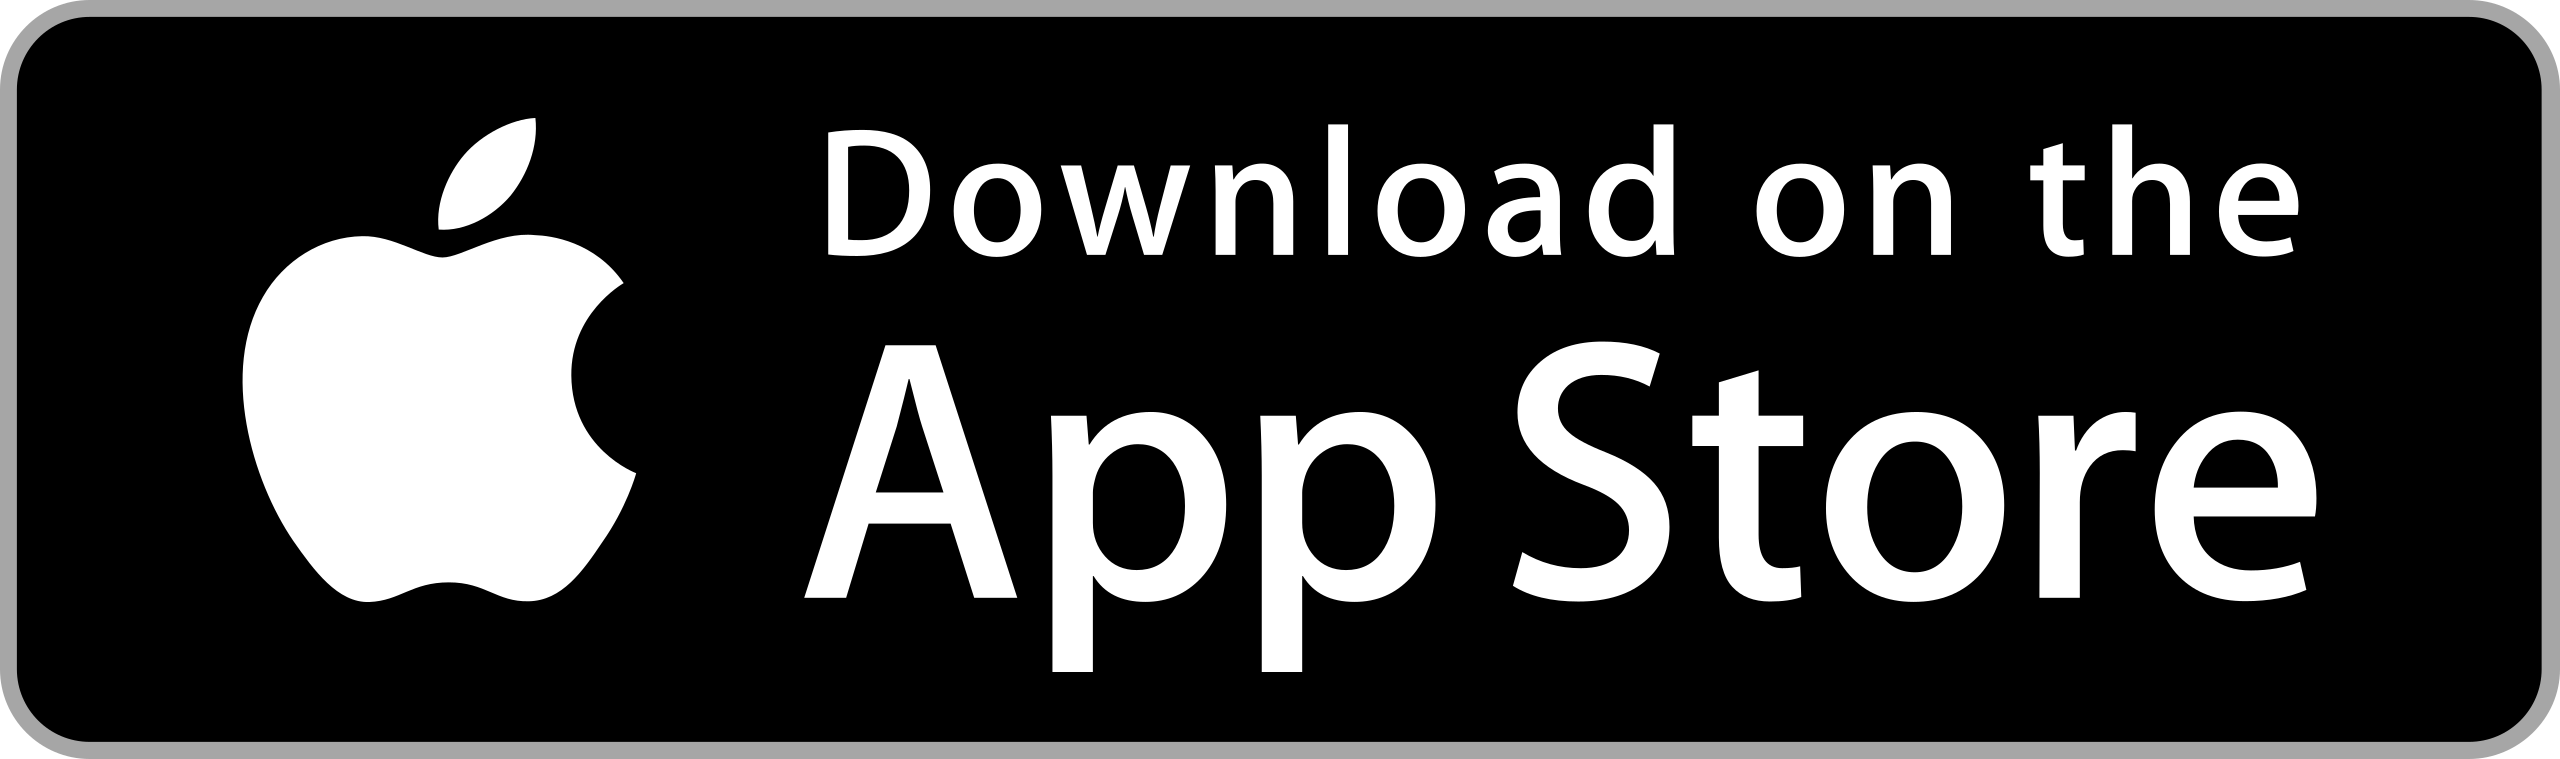 The app store logo displaying the words download on the app store.